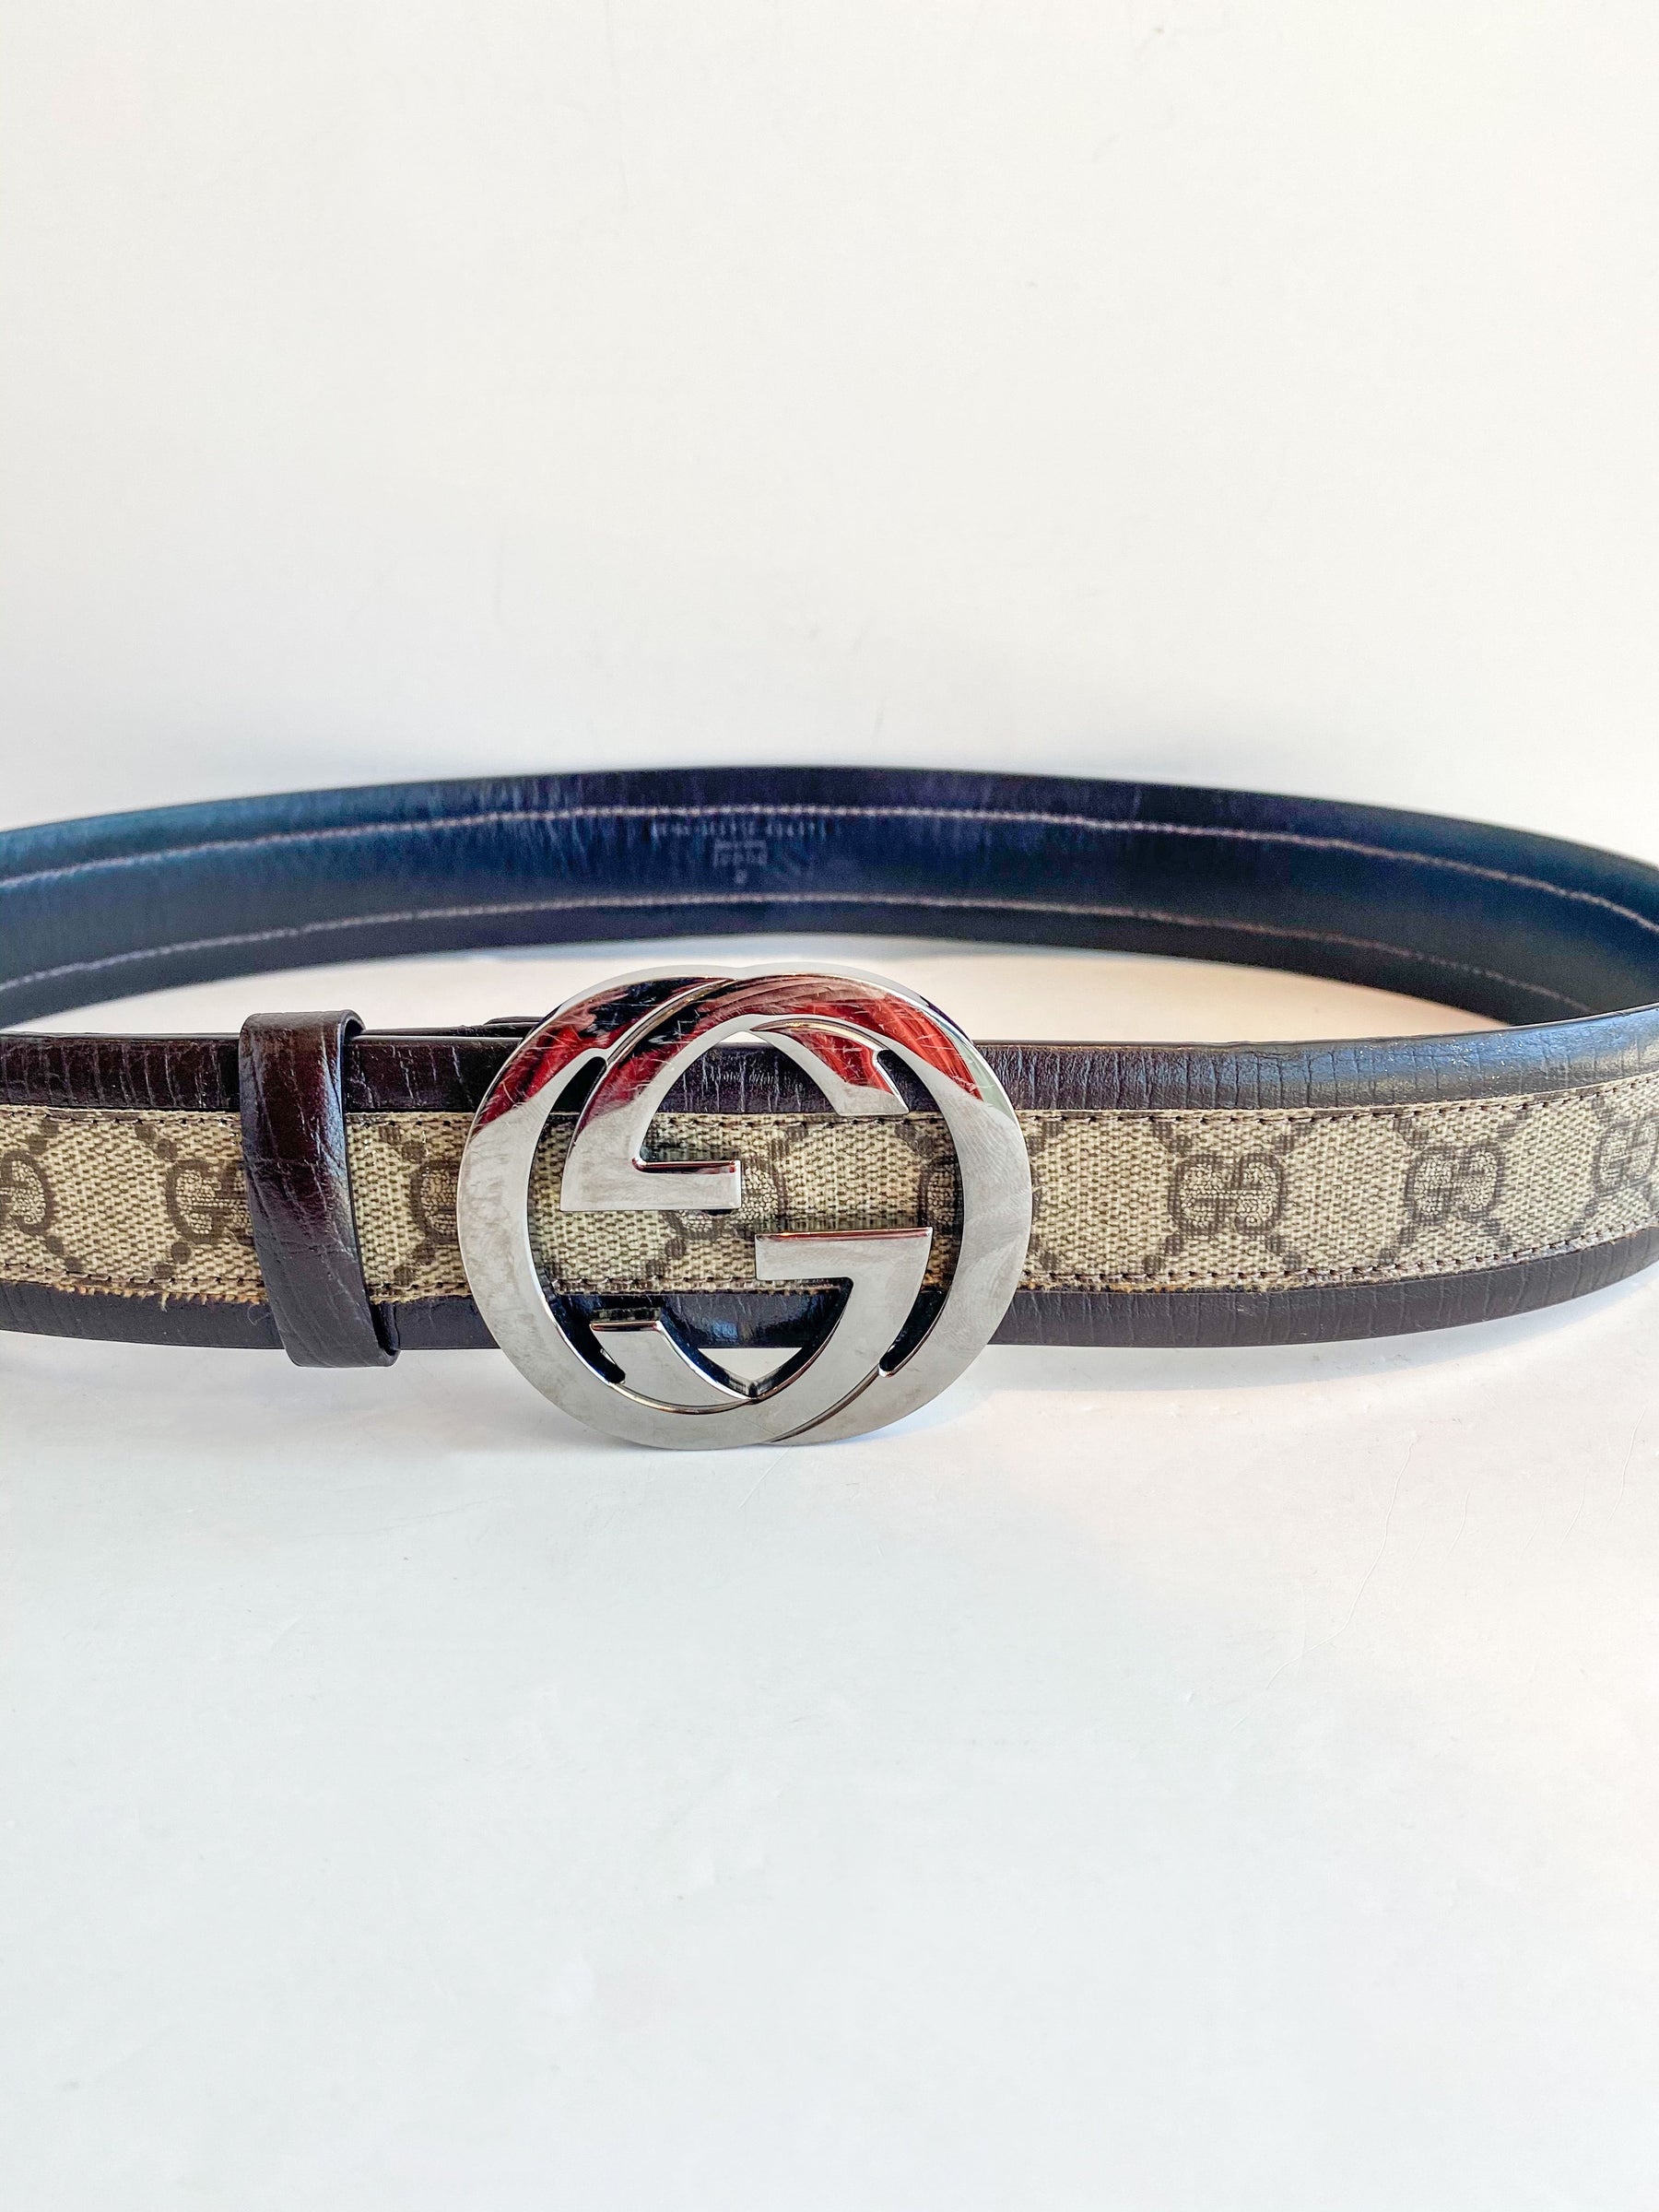 Gucci Guccissima GG Logo Belt Silver Buckle Brown Leather Tan Canvas Front